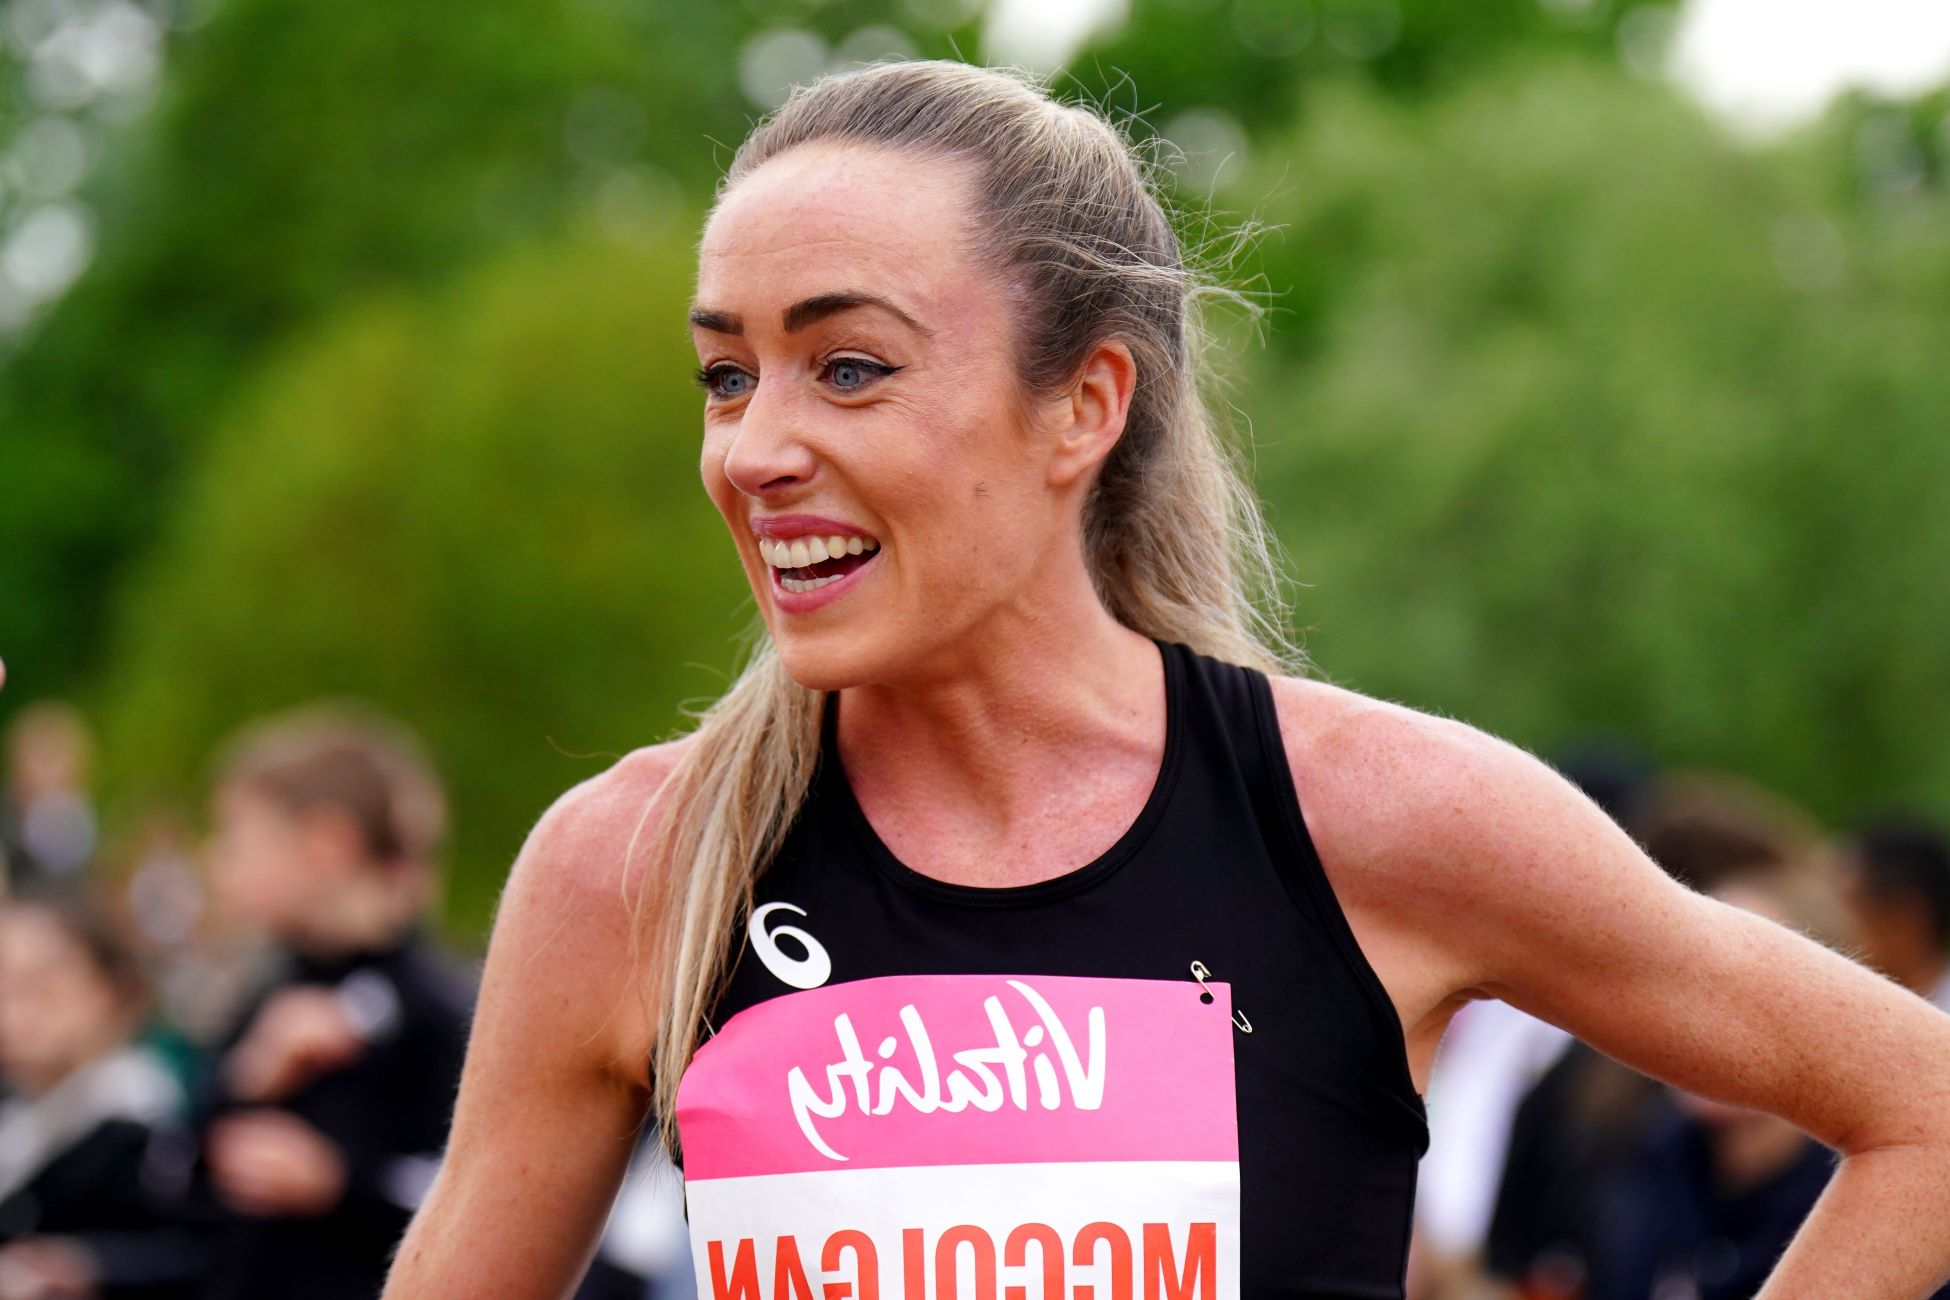 Eilish McColgan’s Advice On Running: Embrace Your Authenticity And Confidence